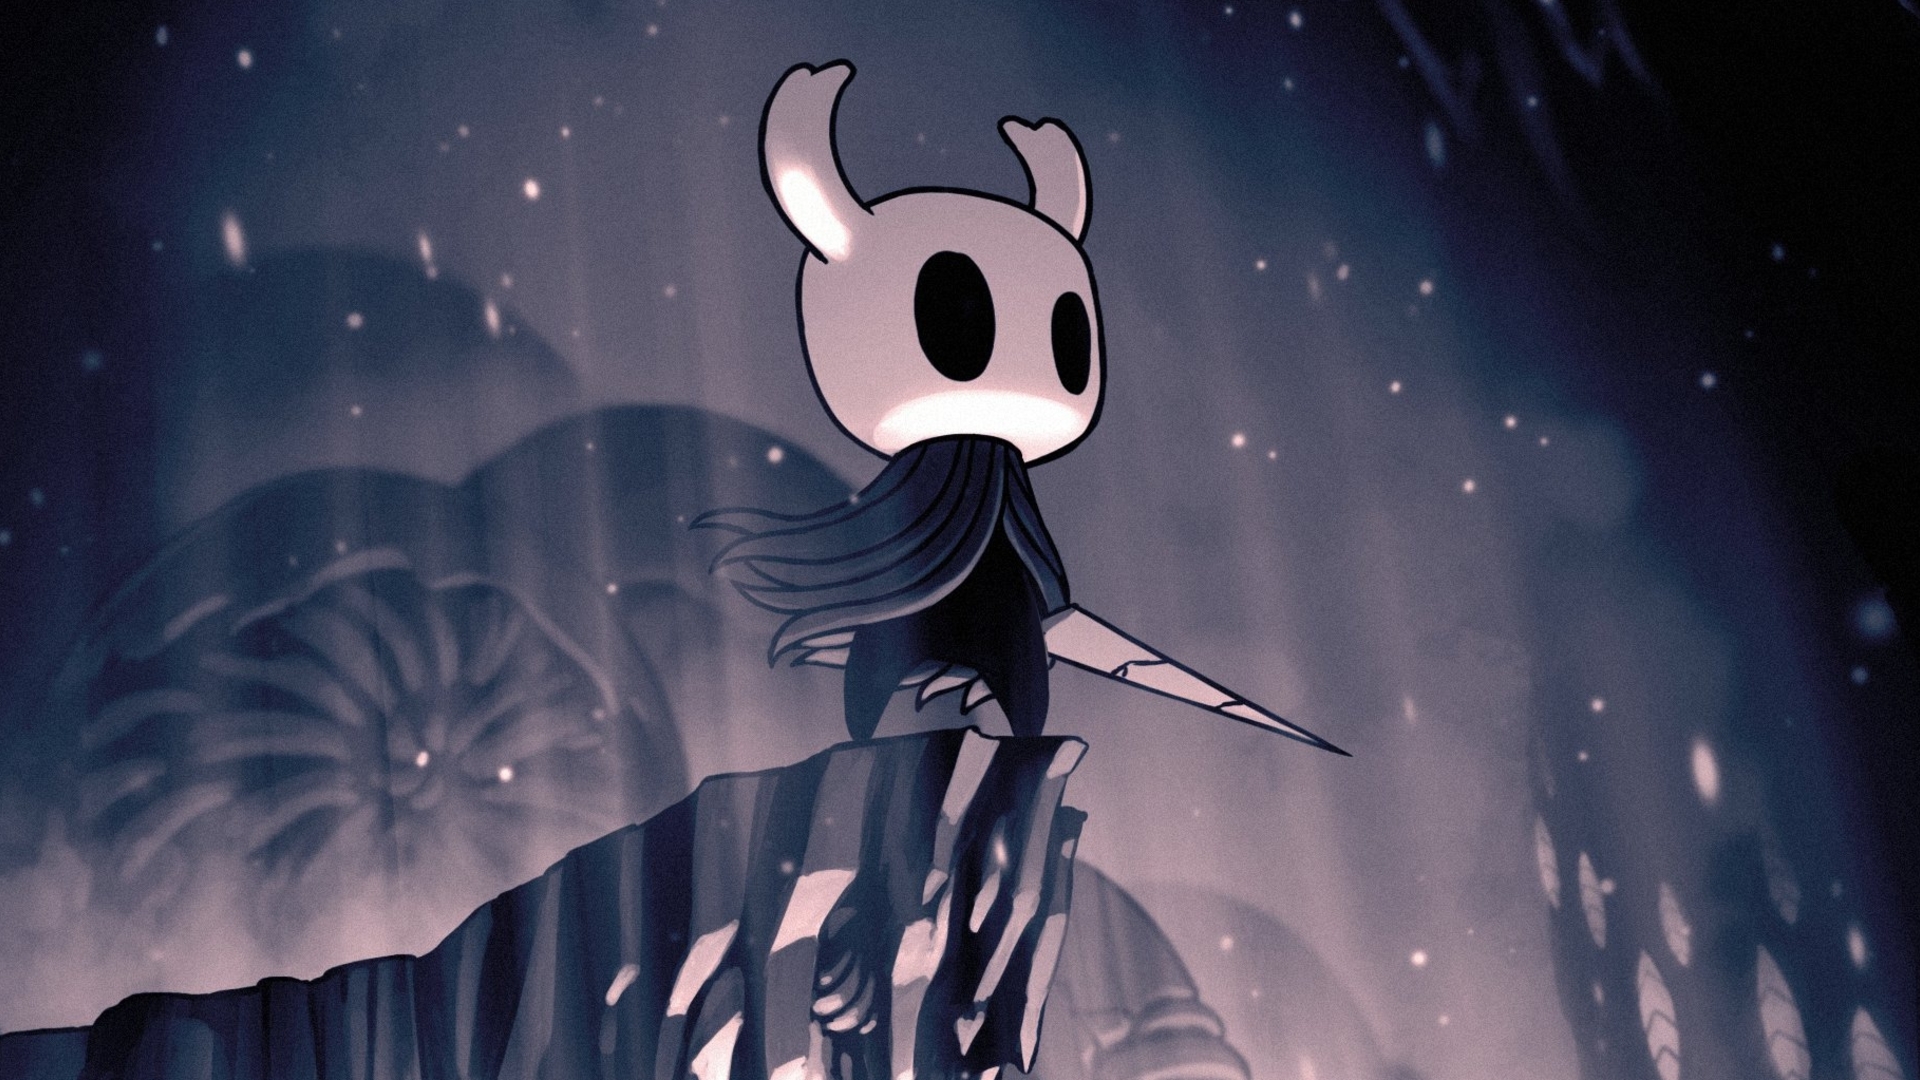 Hollow Knight HD Wallpaper | Background Image | 1920x1080 | ID:985300 - Wallpaper Abyss